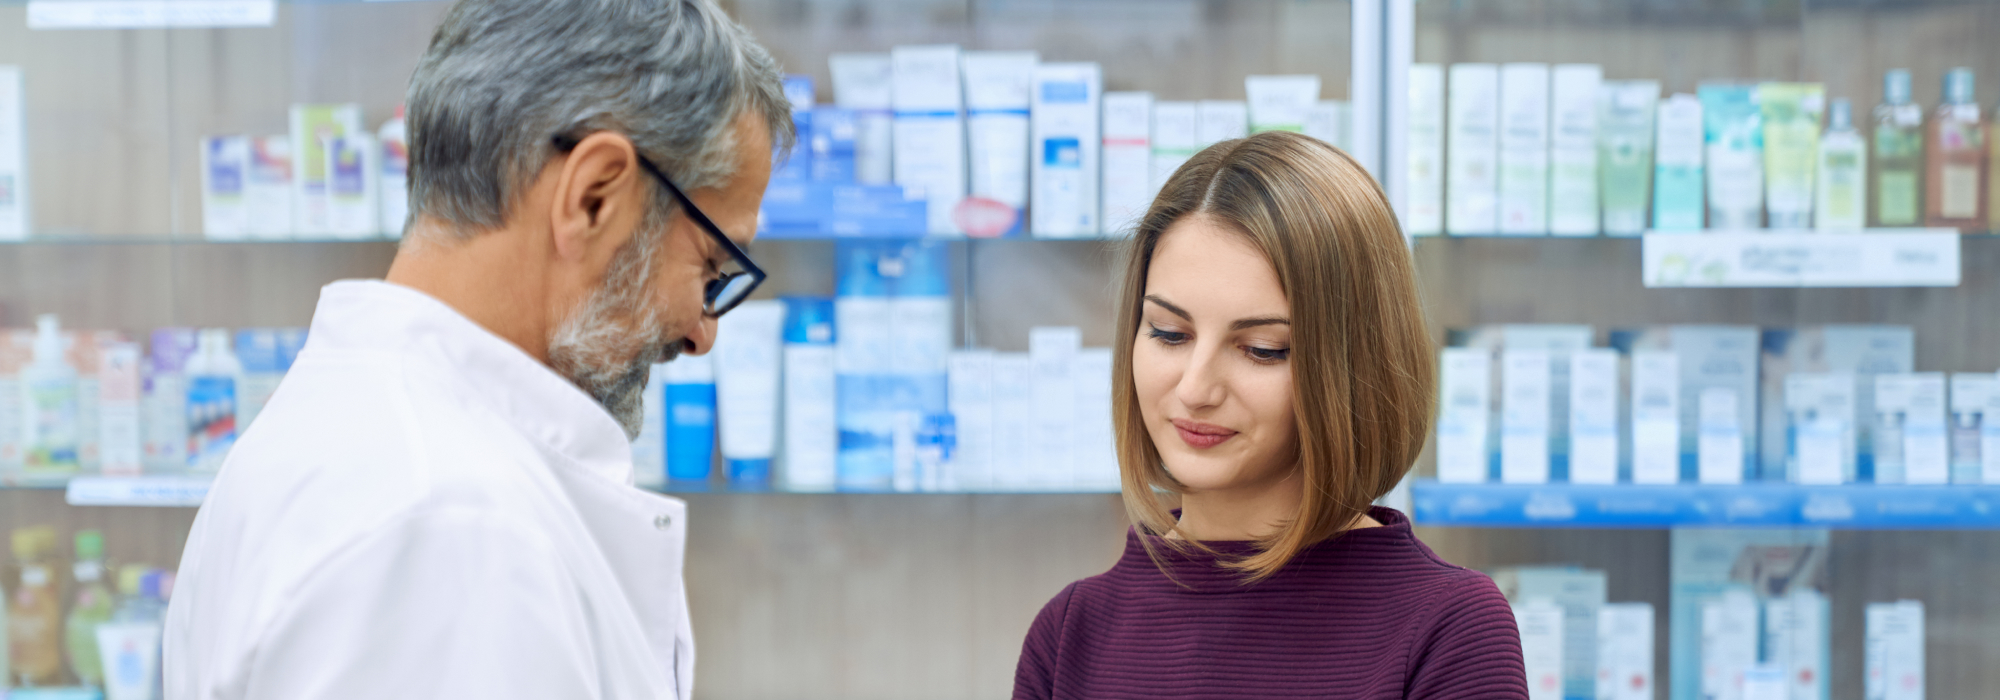 pharmacist discussing medication with customer